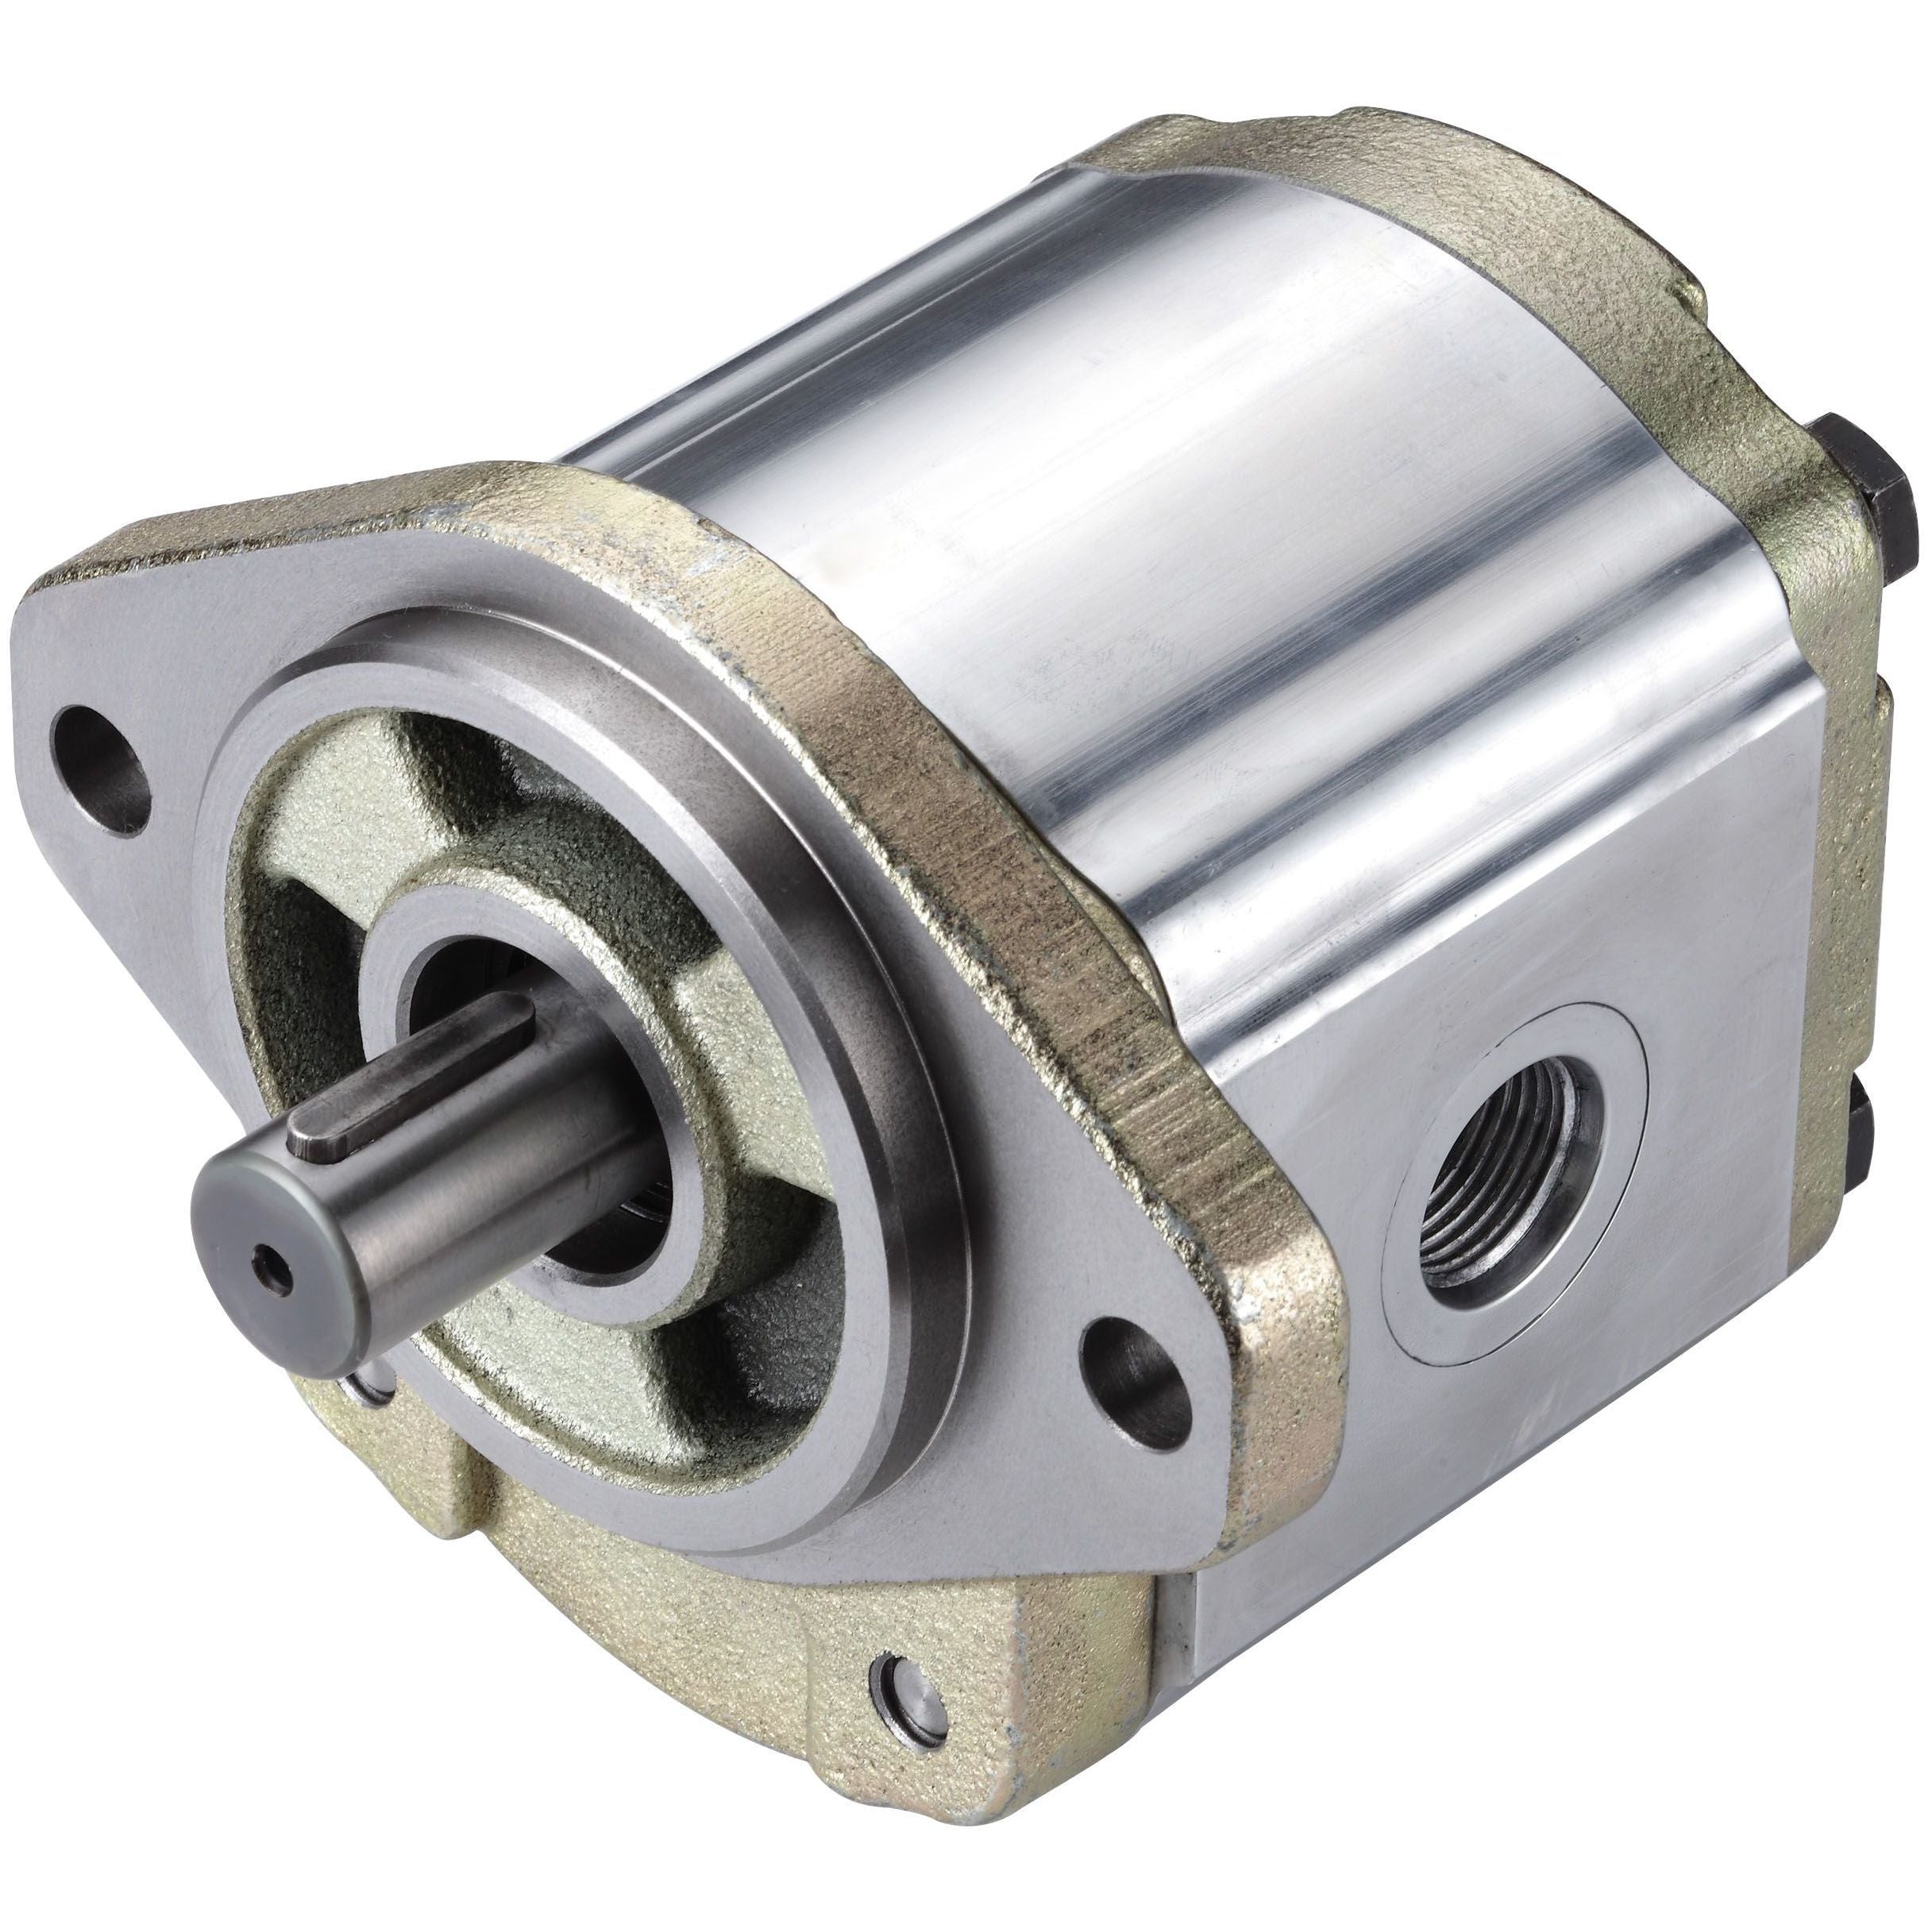 3GA5ZU133R : Honor Gear Pump, CW Rotation, 33cc (2.01in3), 15.69 GPM, 3500psi, 3000 RPM, #16 SAE (1") In, #12 SAE (3/4") Out, Splined Shaft 11-Tooth, 16/32 Pitch, SAE A 2-Bolt Mount